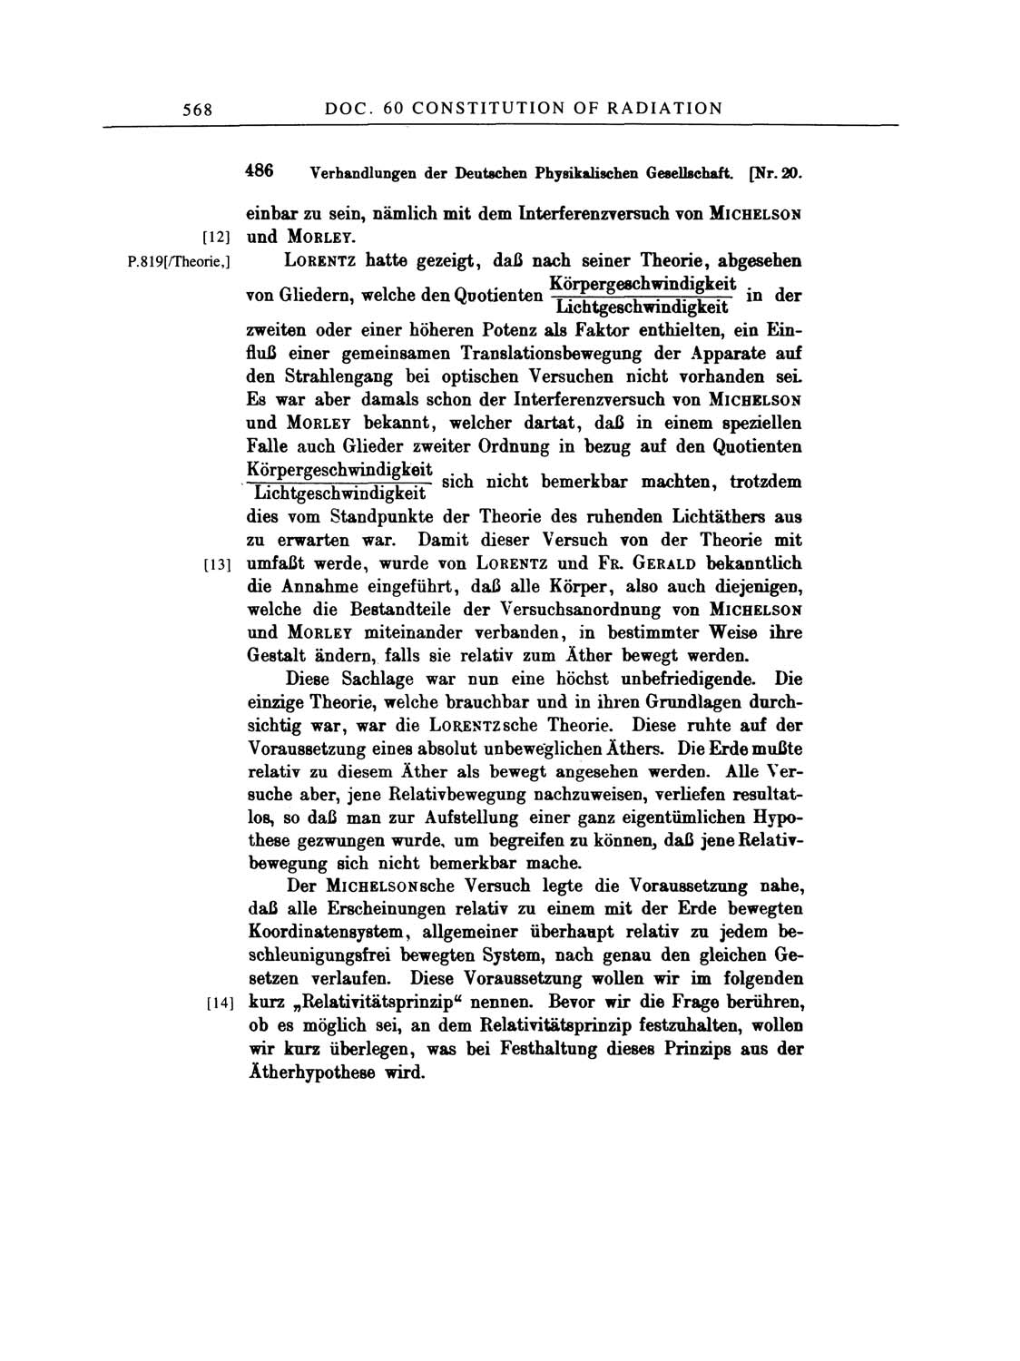 Volume 2: The Swiss Years: Writings, 1900-1909 page 568